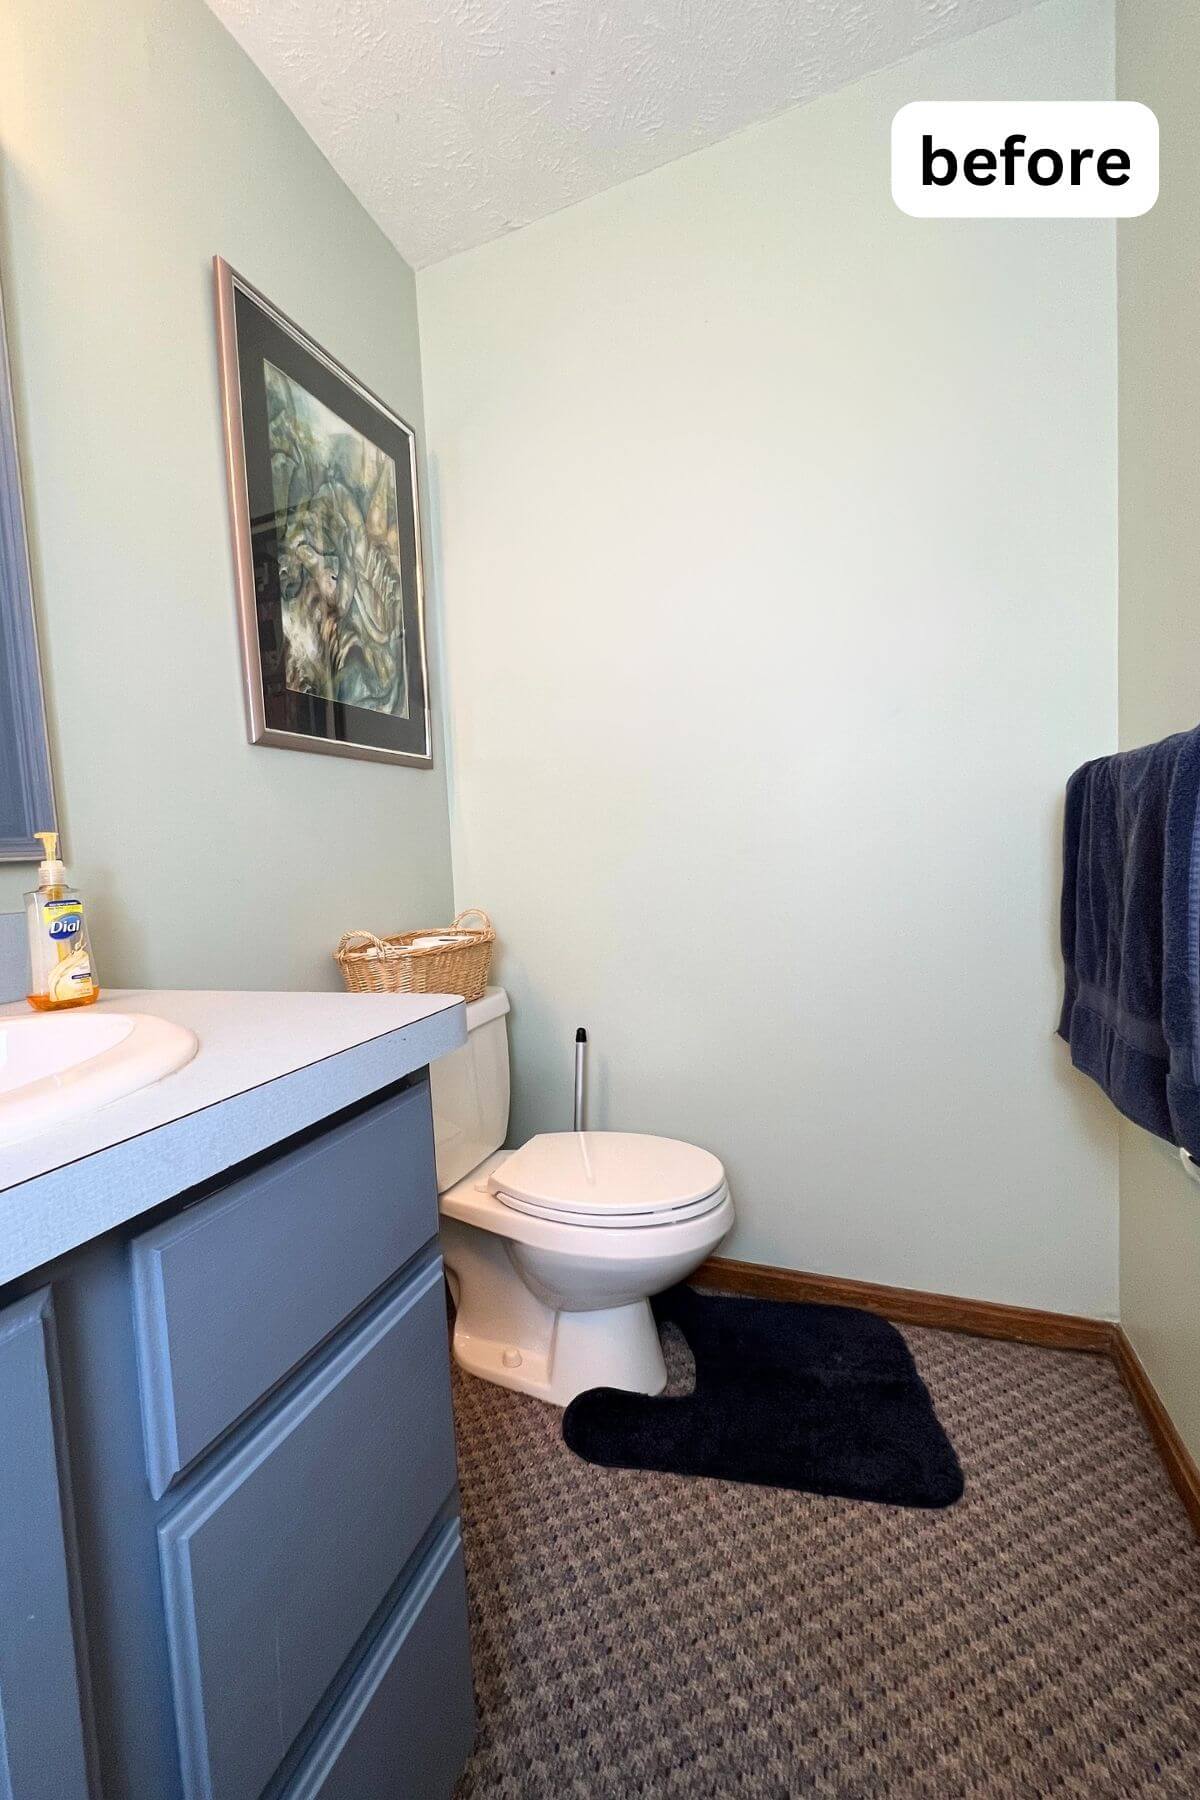 small half powder room with blue painted cabinets, carpet on the floor and green walls with text "Before".